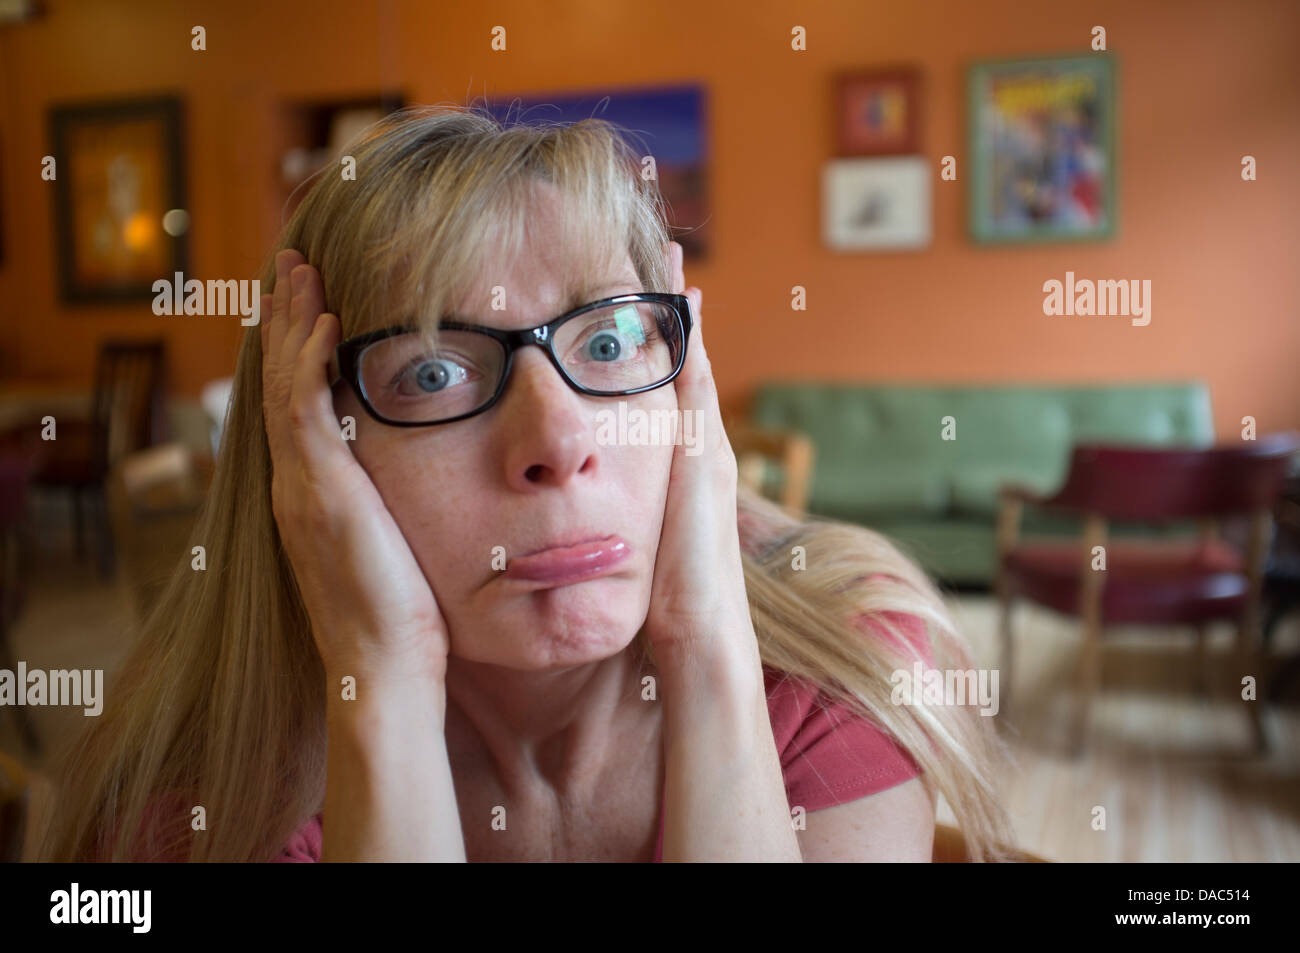 Woman with glasses on holding her hands on either side of her face pulling her cheeks back. Stock Photo